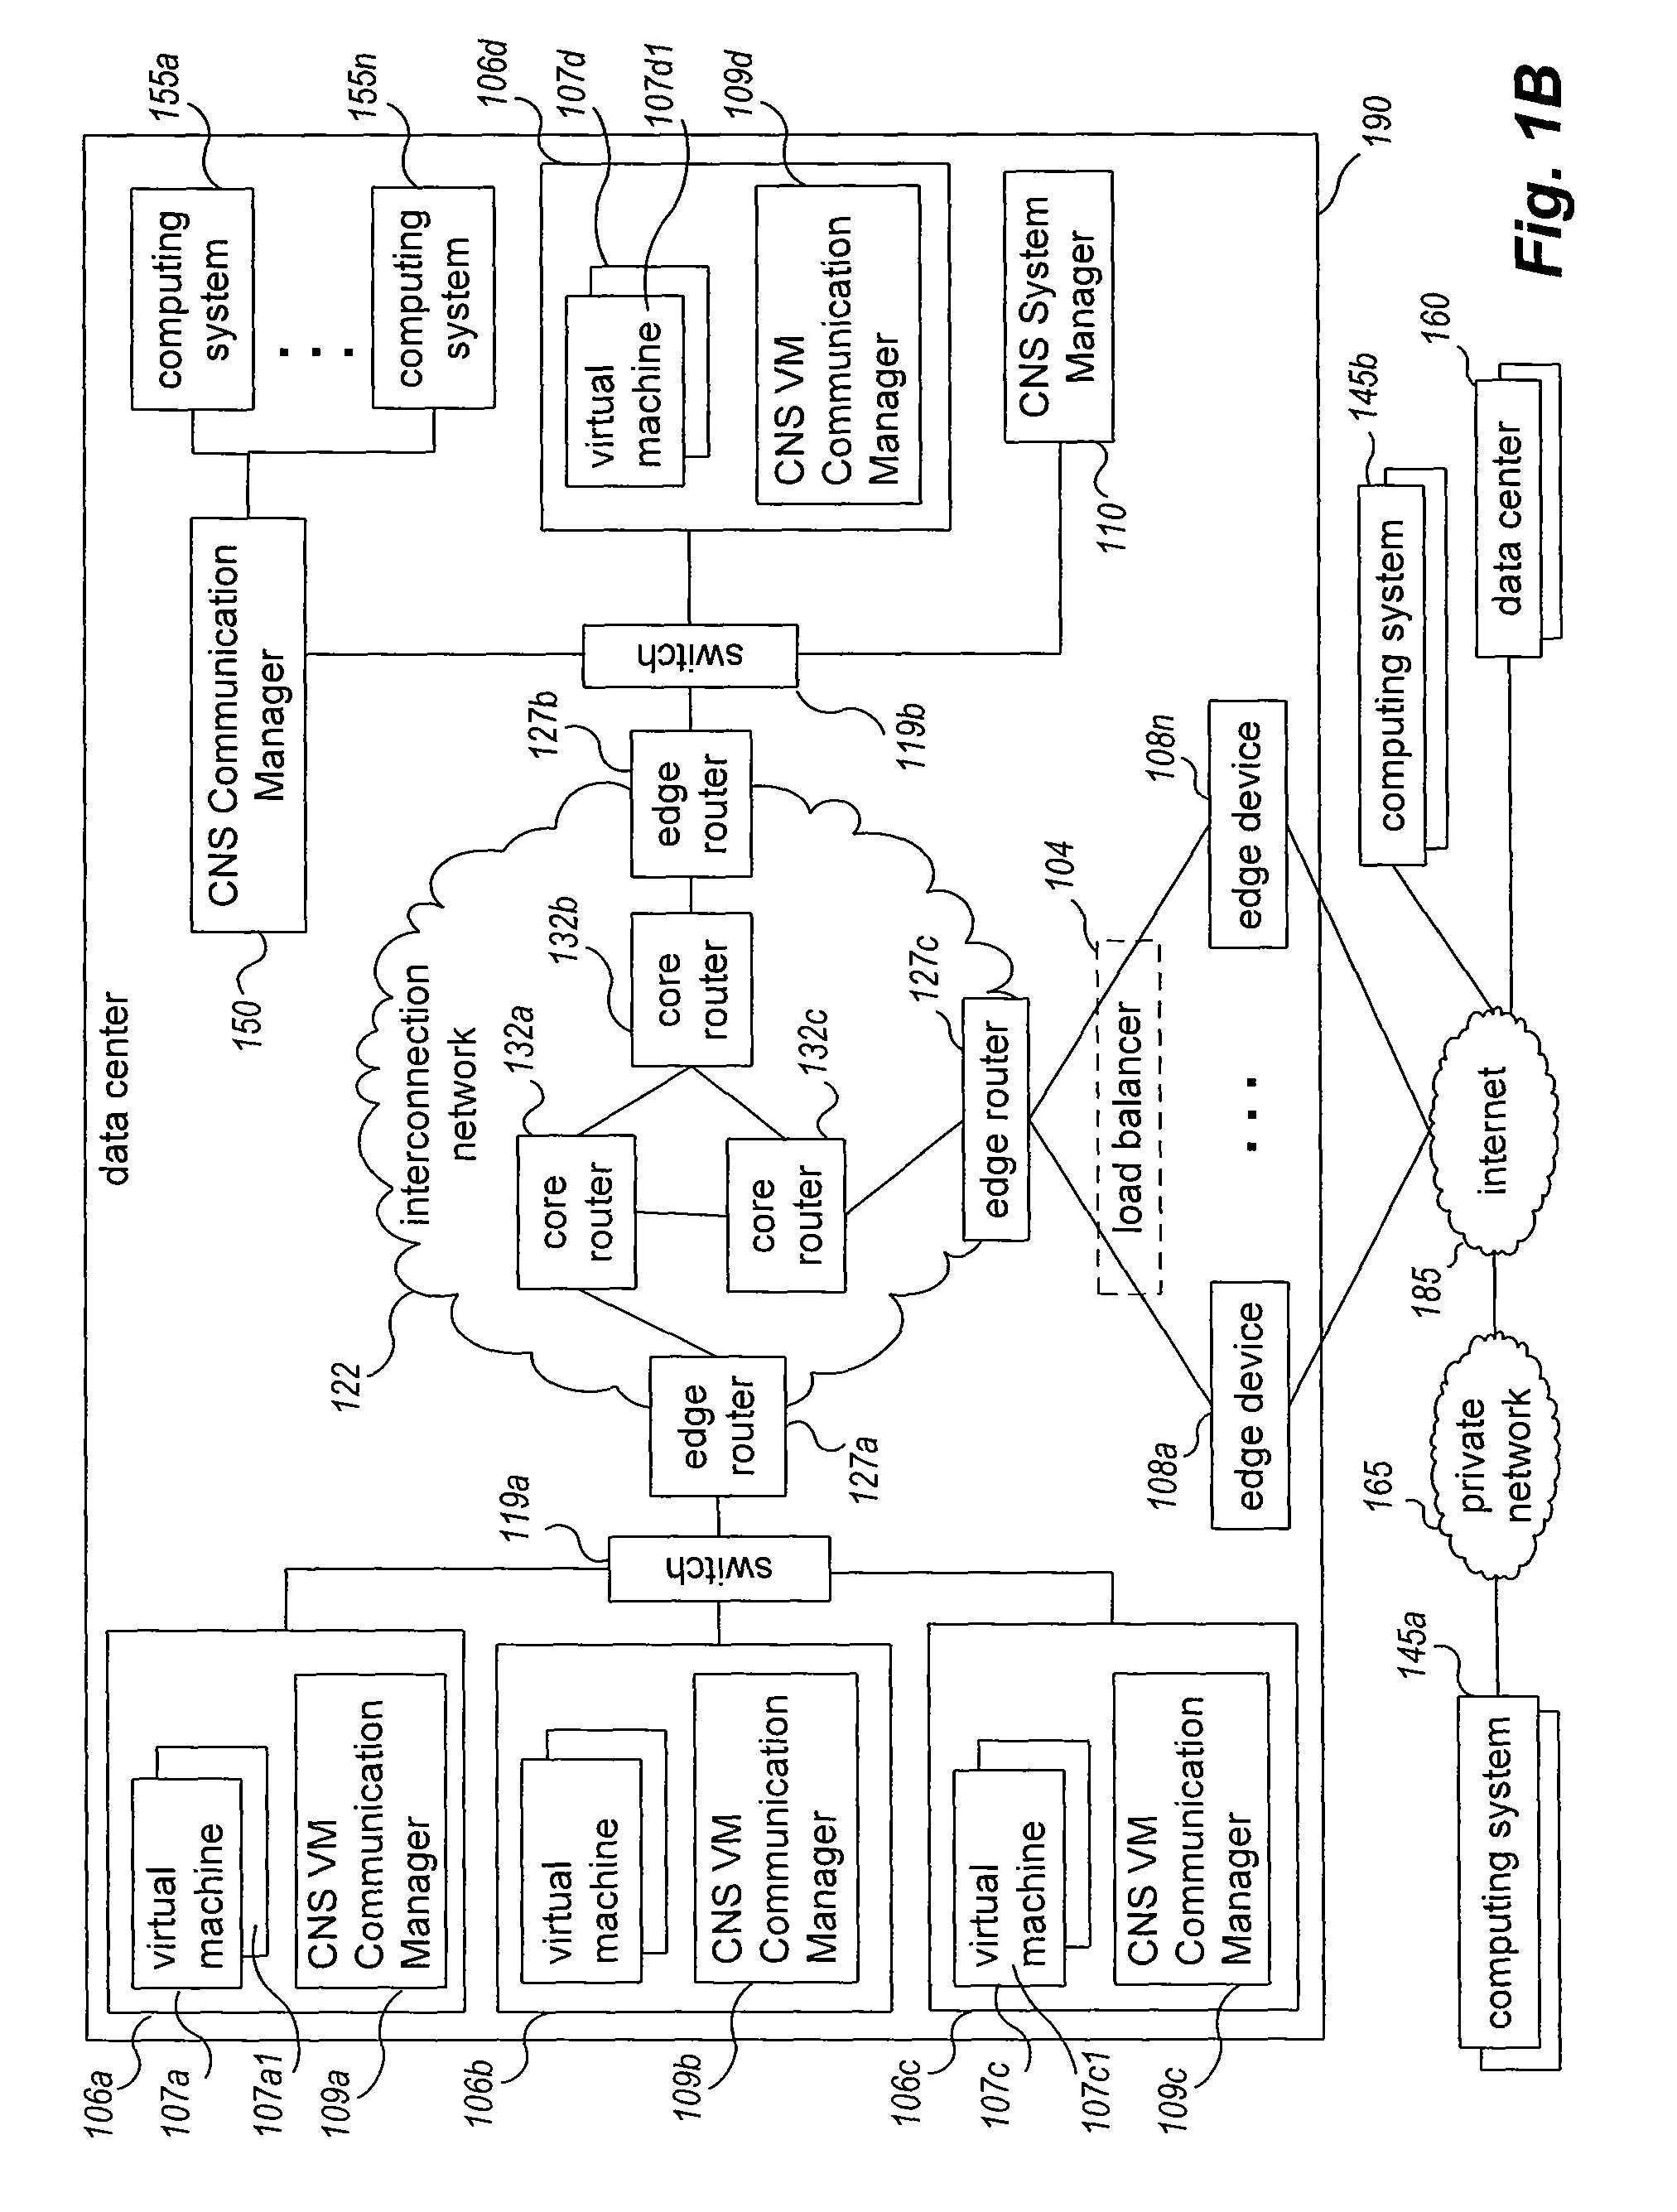 Managing external communications for provided computer networks